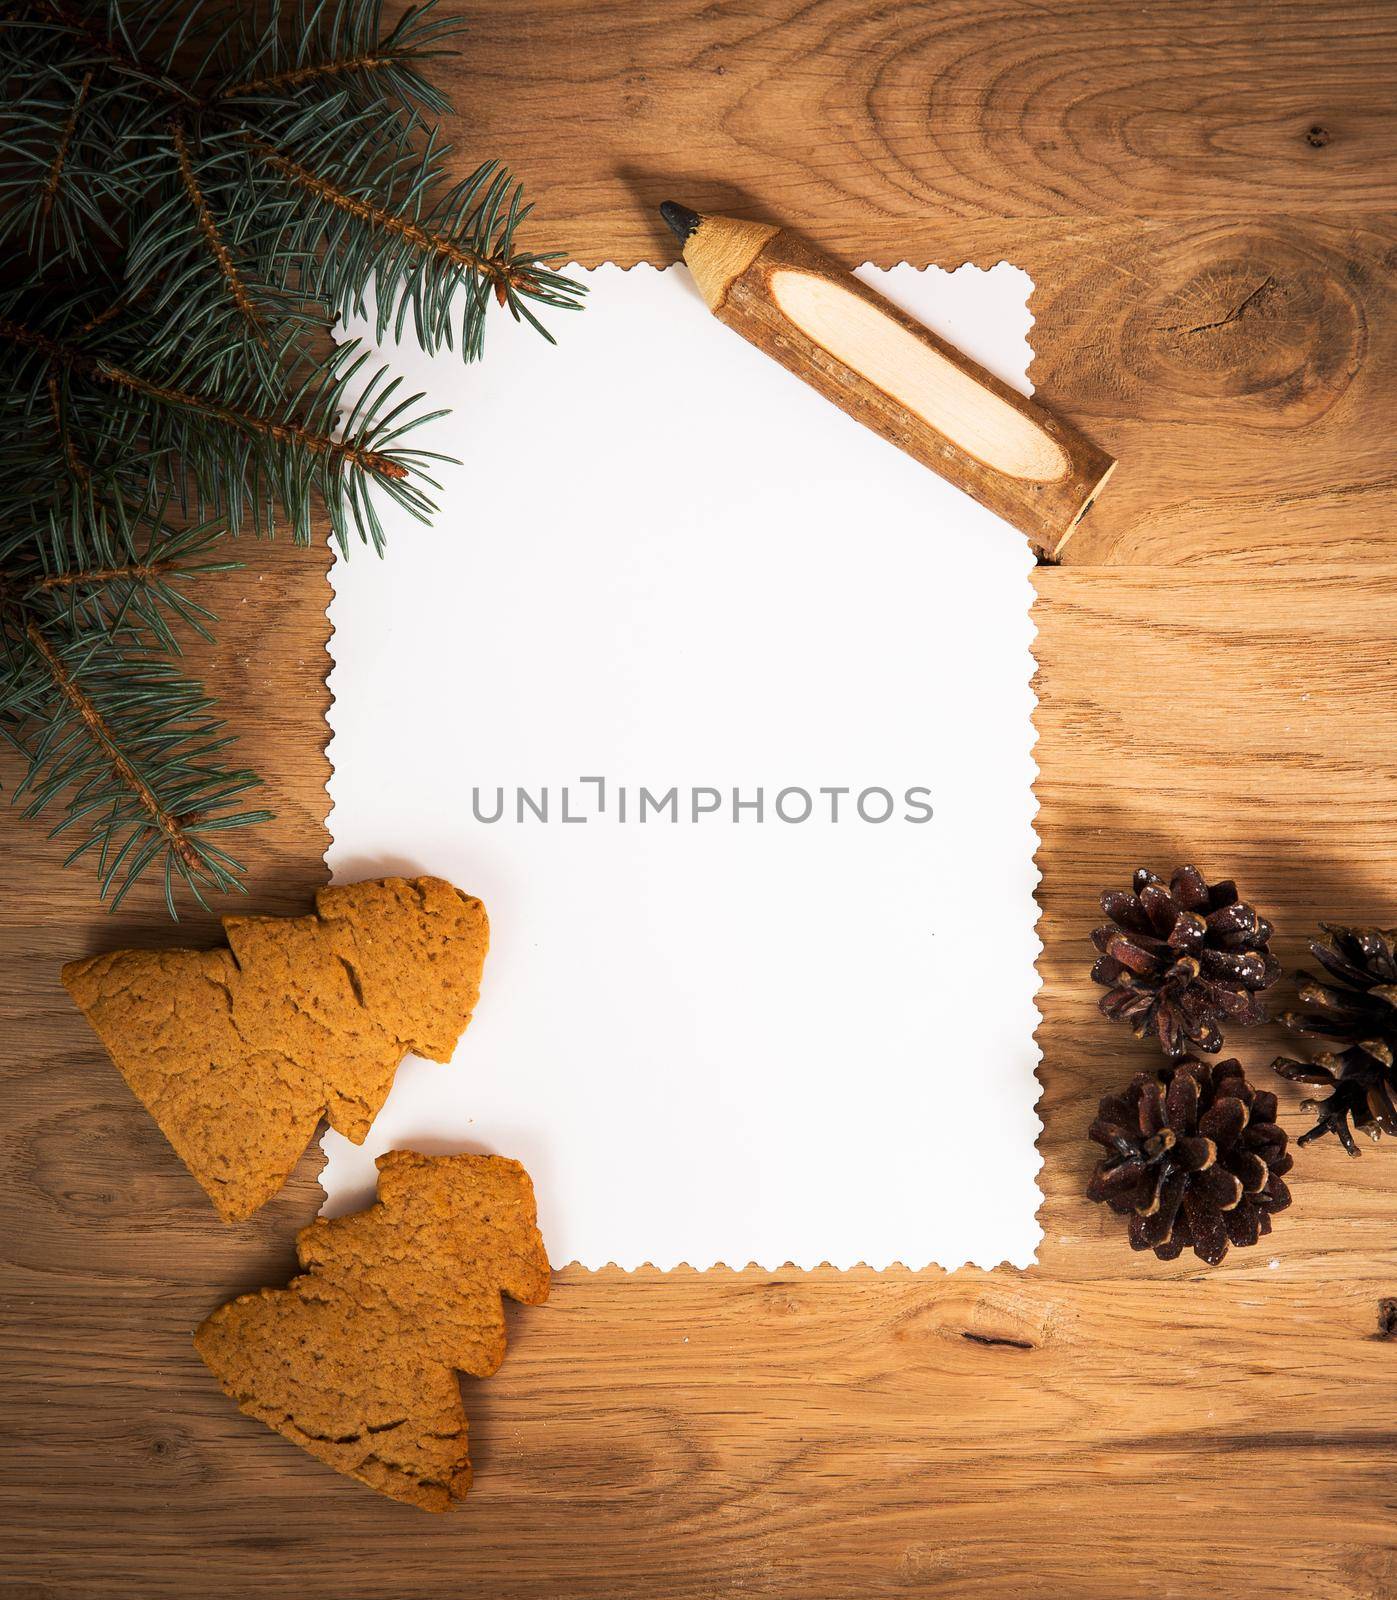 blank sheet of paper on the wooden floor with a pencil and Christmas decorations